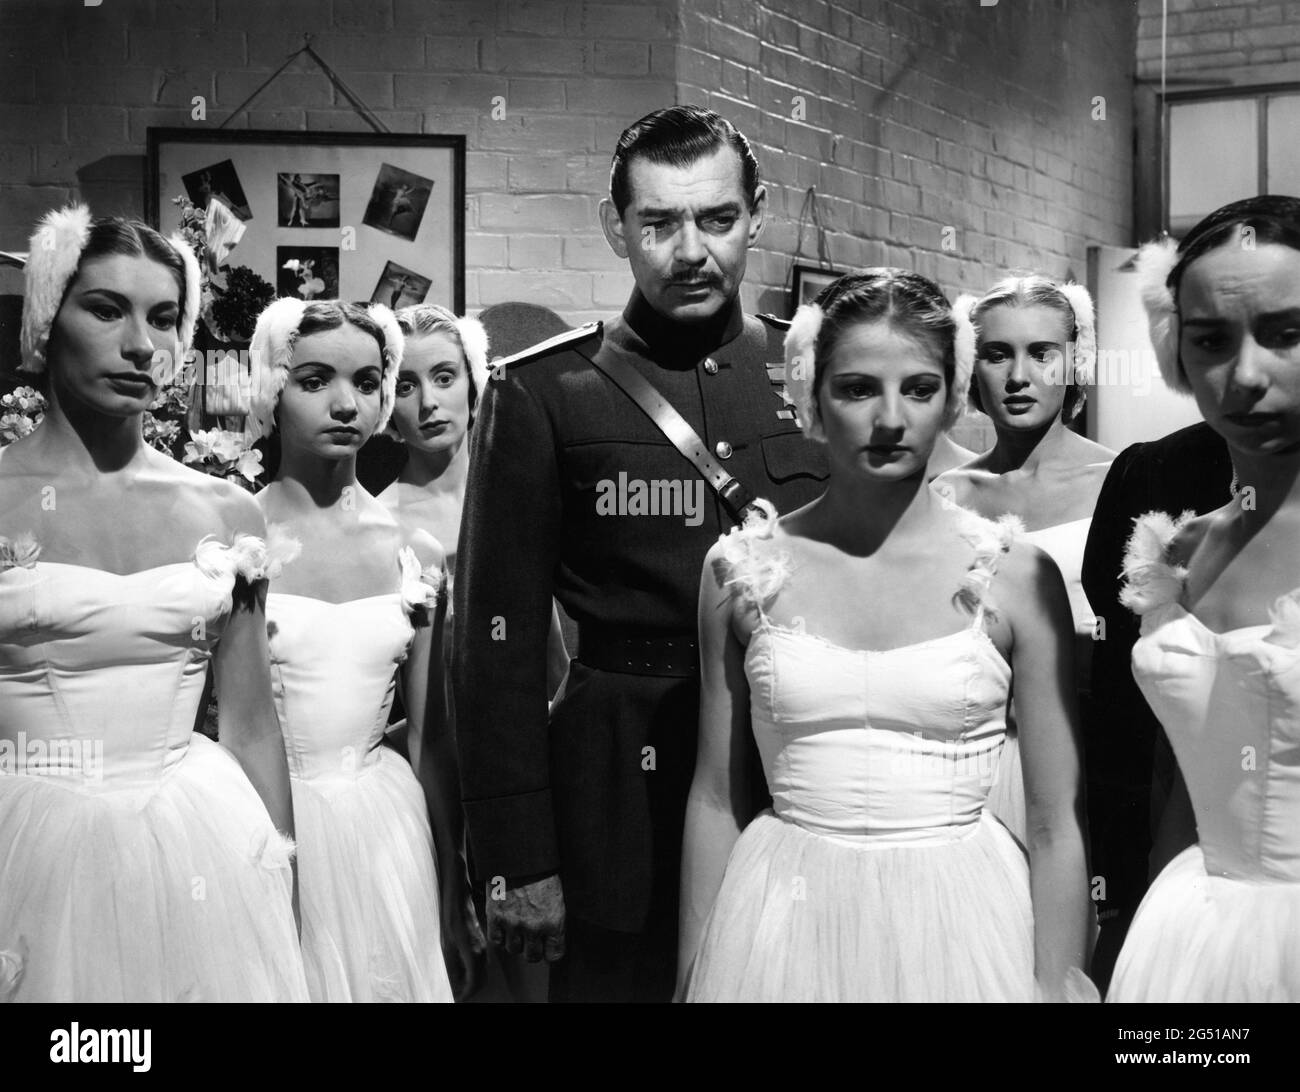 CLARK GABLE with Ballet Dancers in NEVER LET ME GO 1953 director DELMER DAVES from novel Come The Dawn by Paul Winterton producer Clarence Brown Metro Goldwyn Mayer Stock Photo